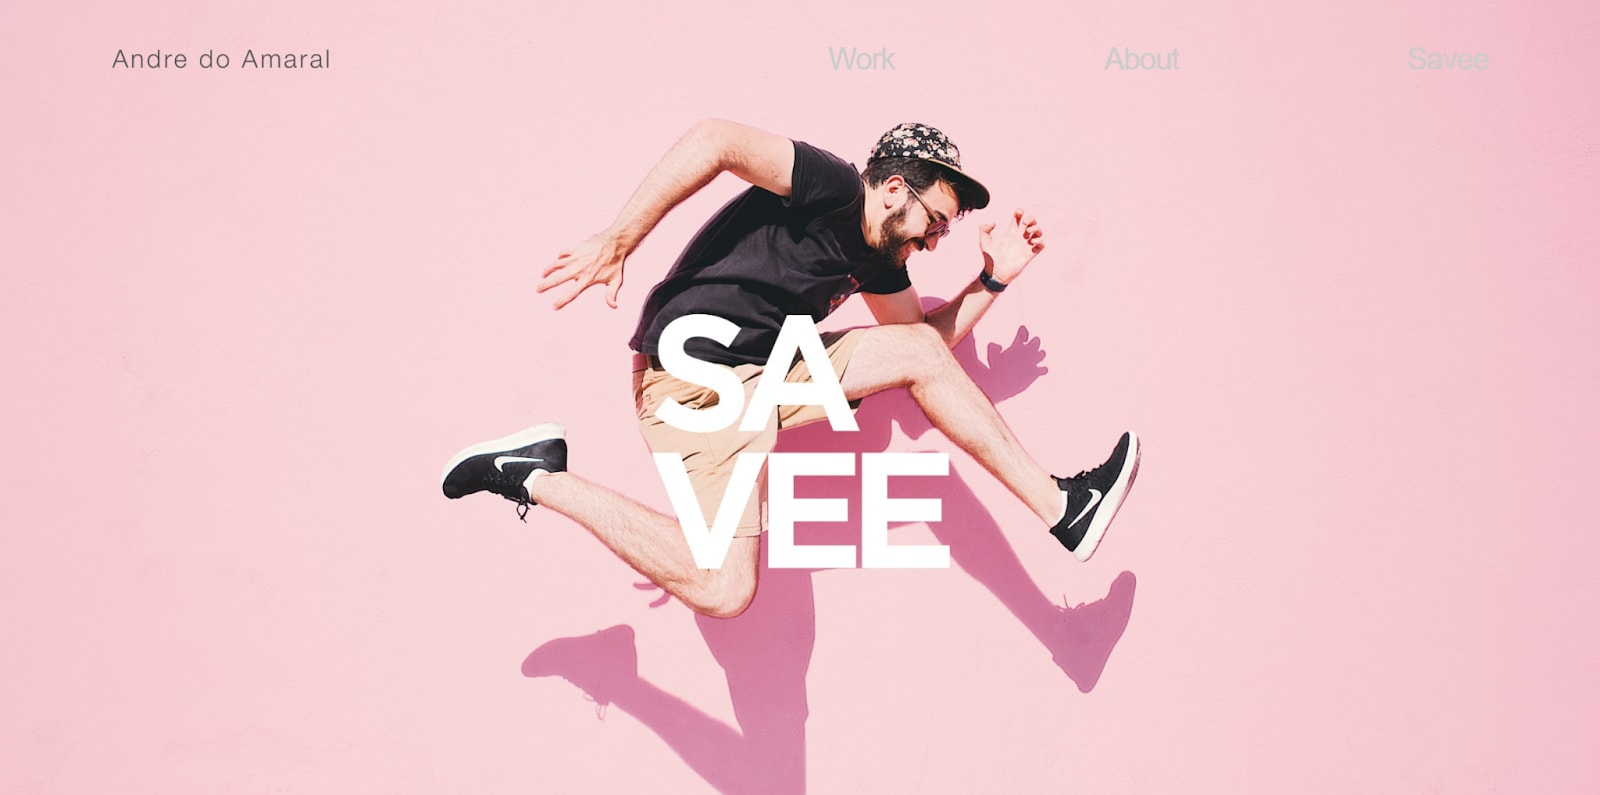 Savee page person jumping up with a pink background behind him